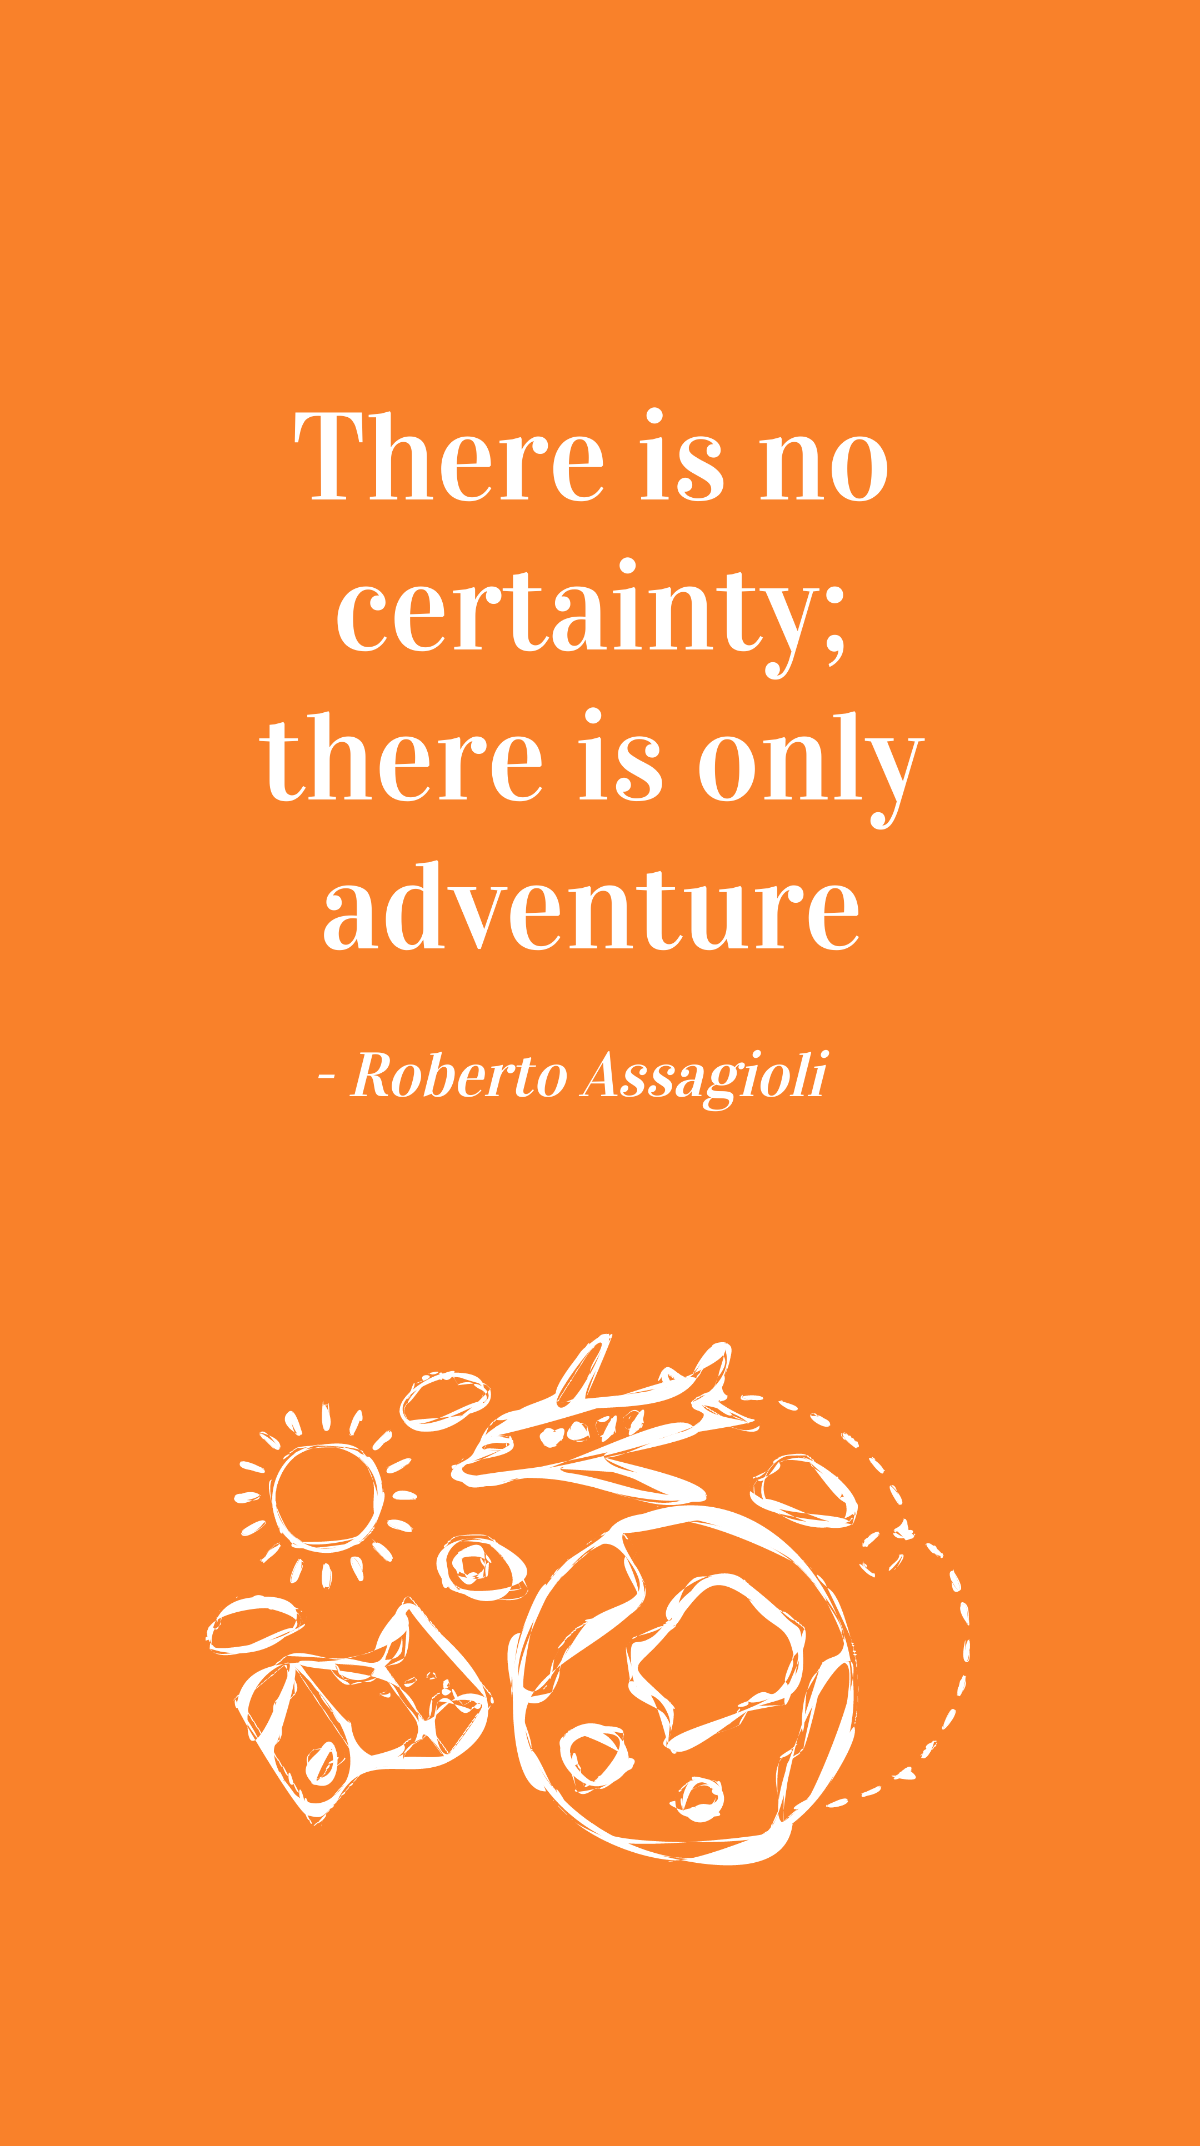 Roberto Assagioli - There is no certainty; there is only adventure Template